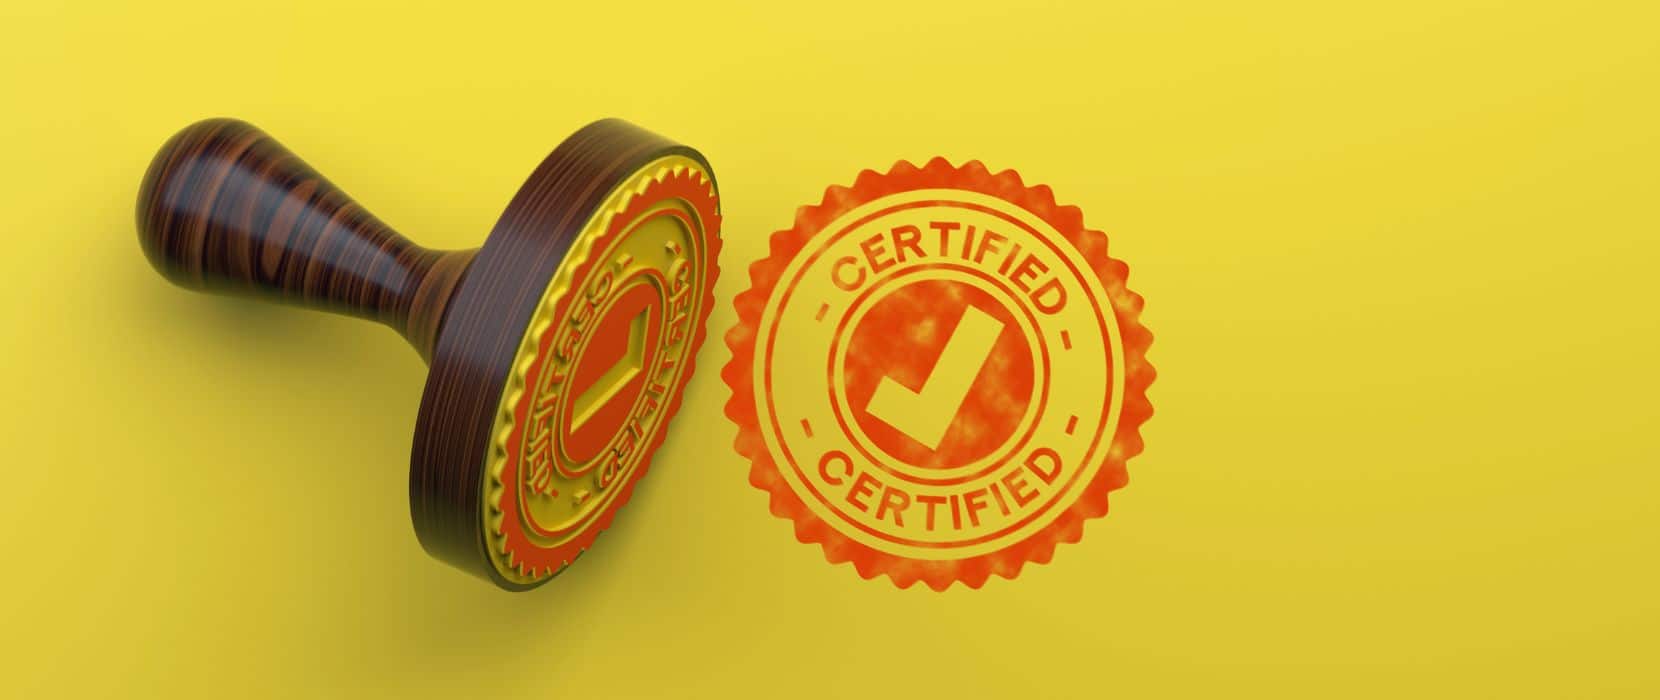 SAP Certification- Why?